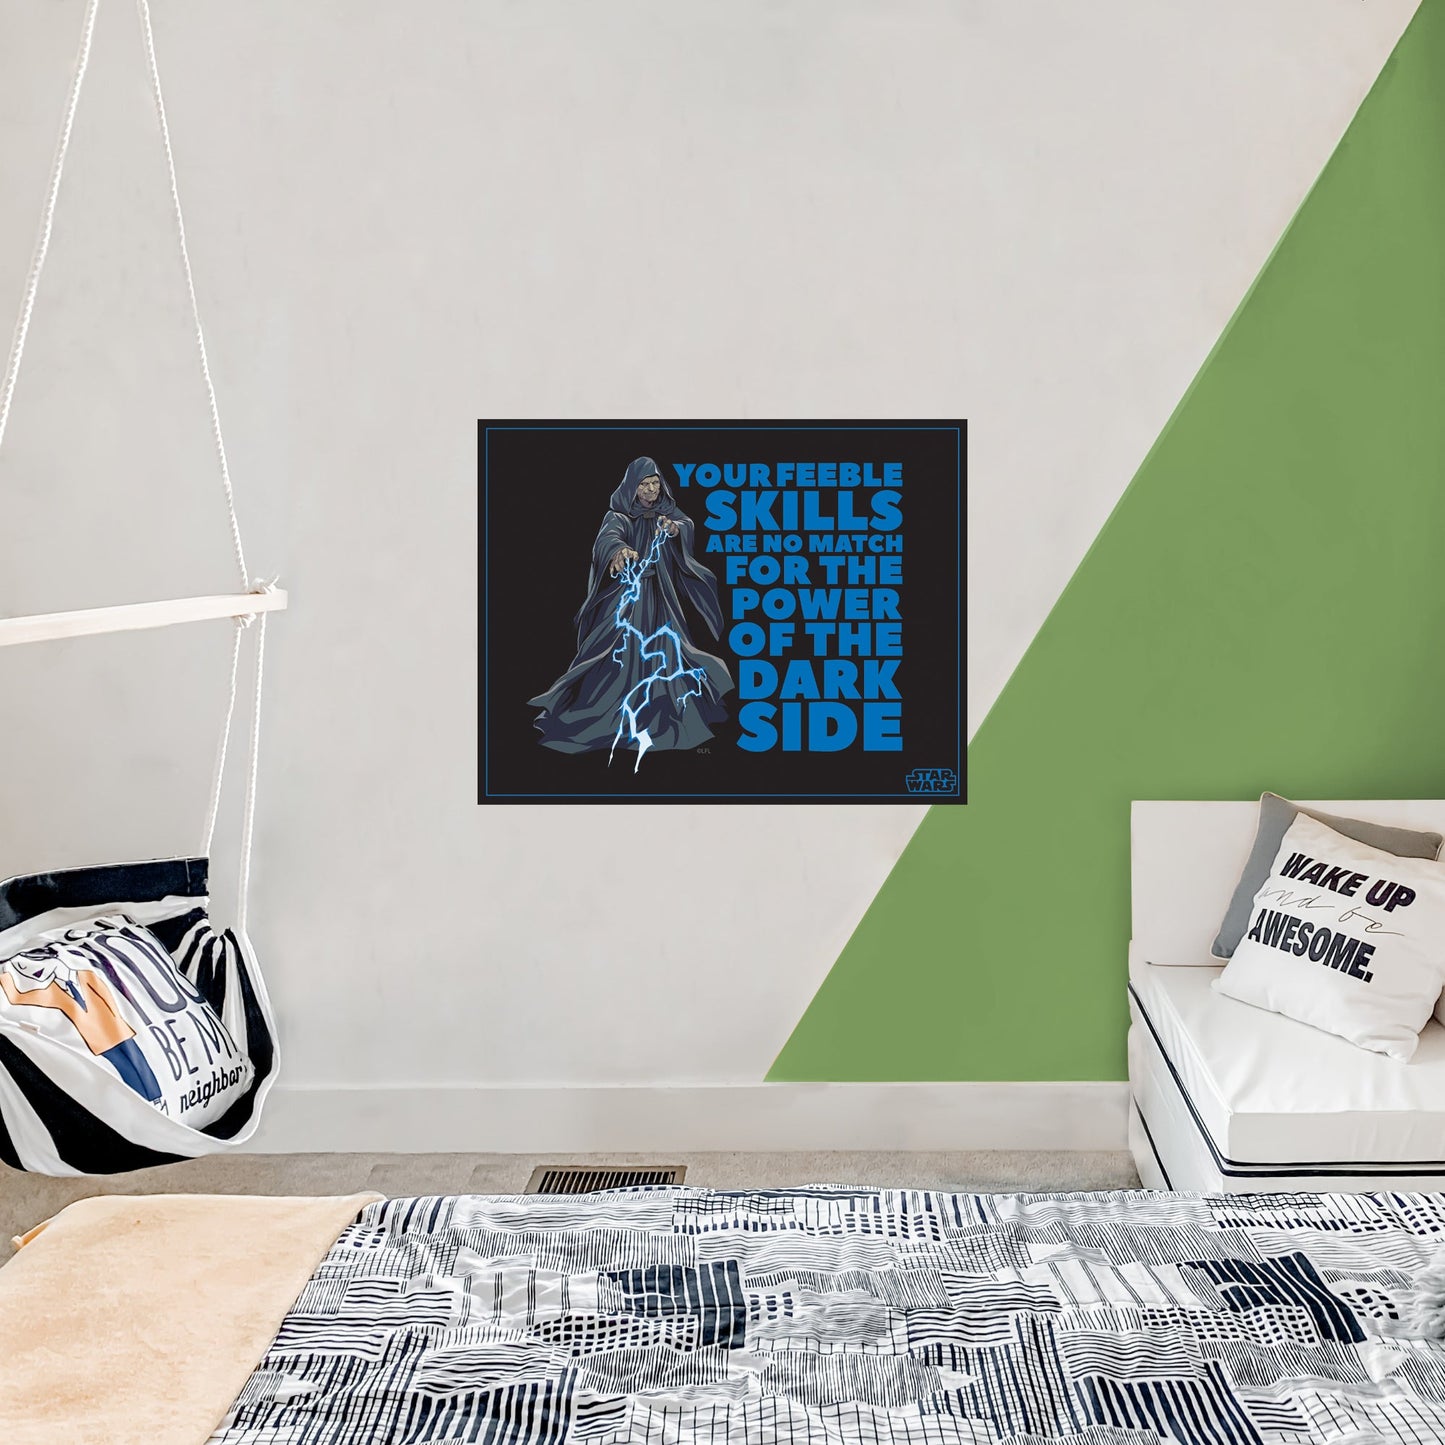 Emperor Feeble Skills Quote Poster - Officially Licensed Star Wars Removable Adhesive Decal